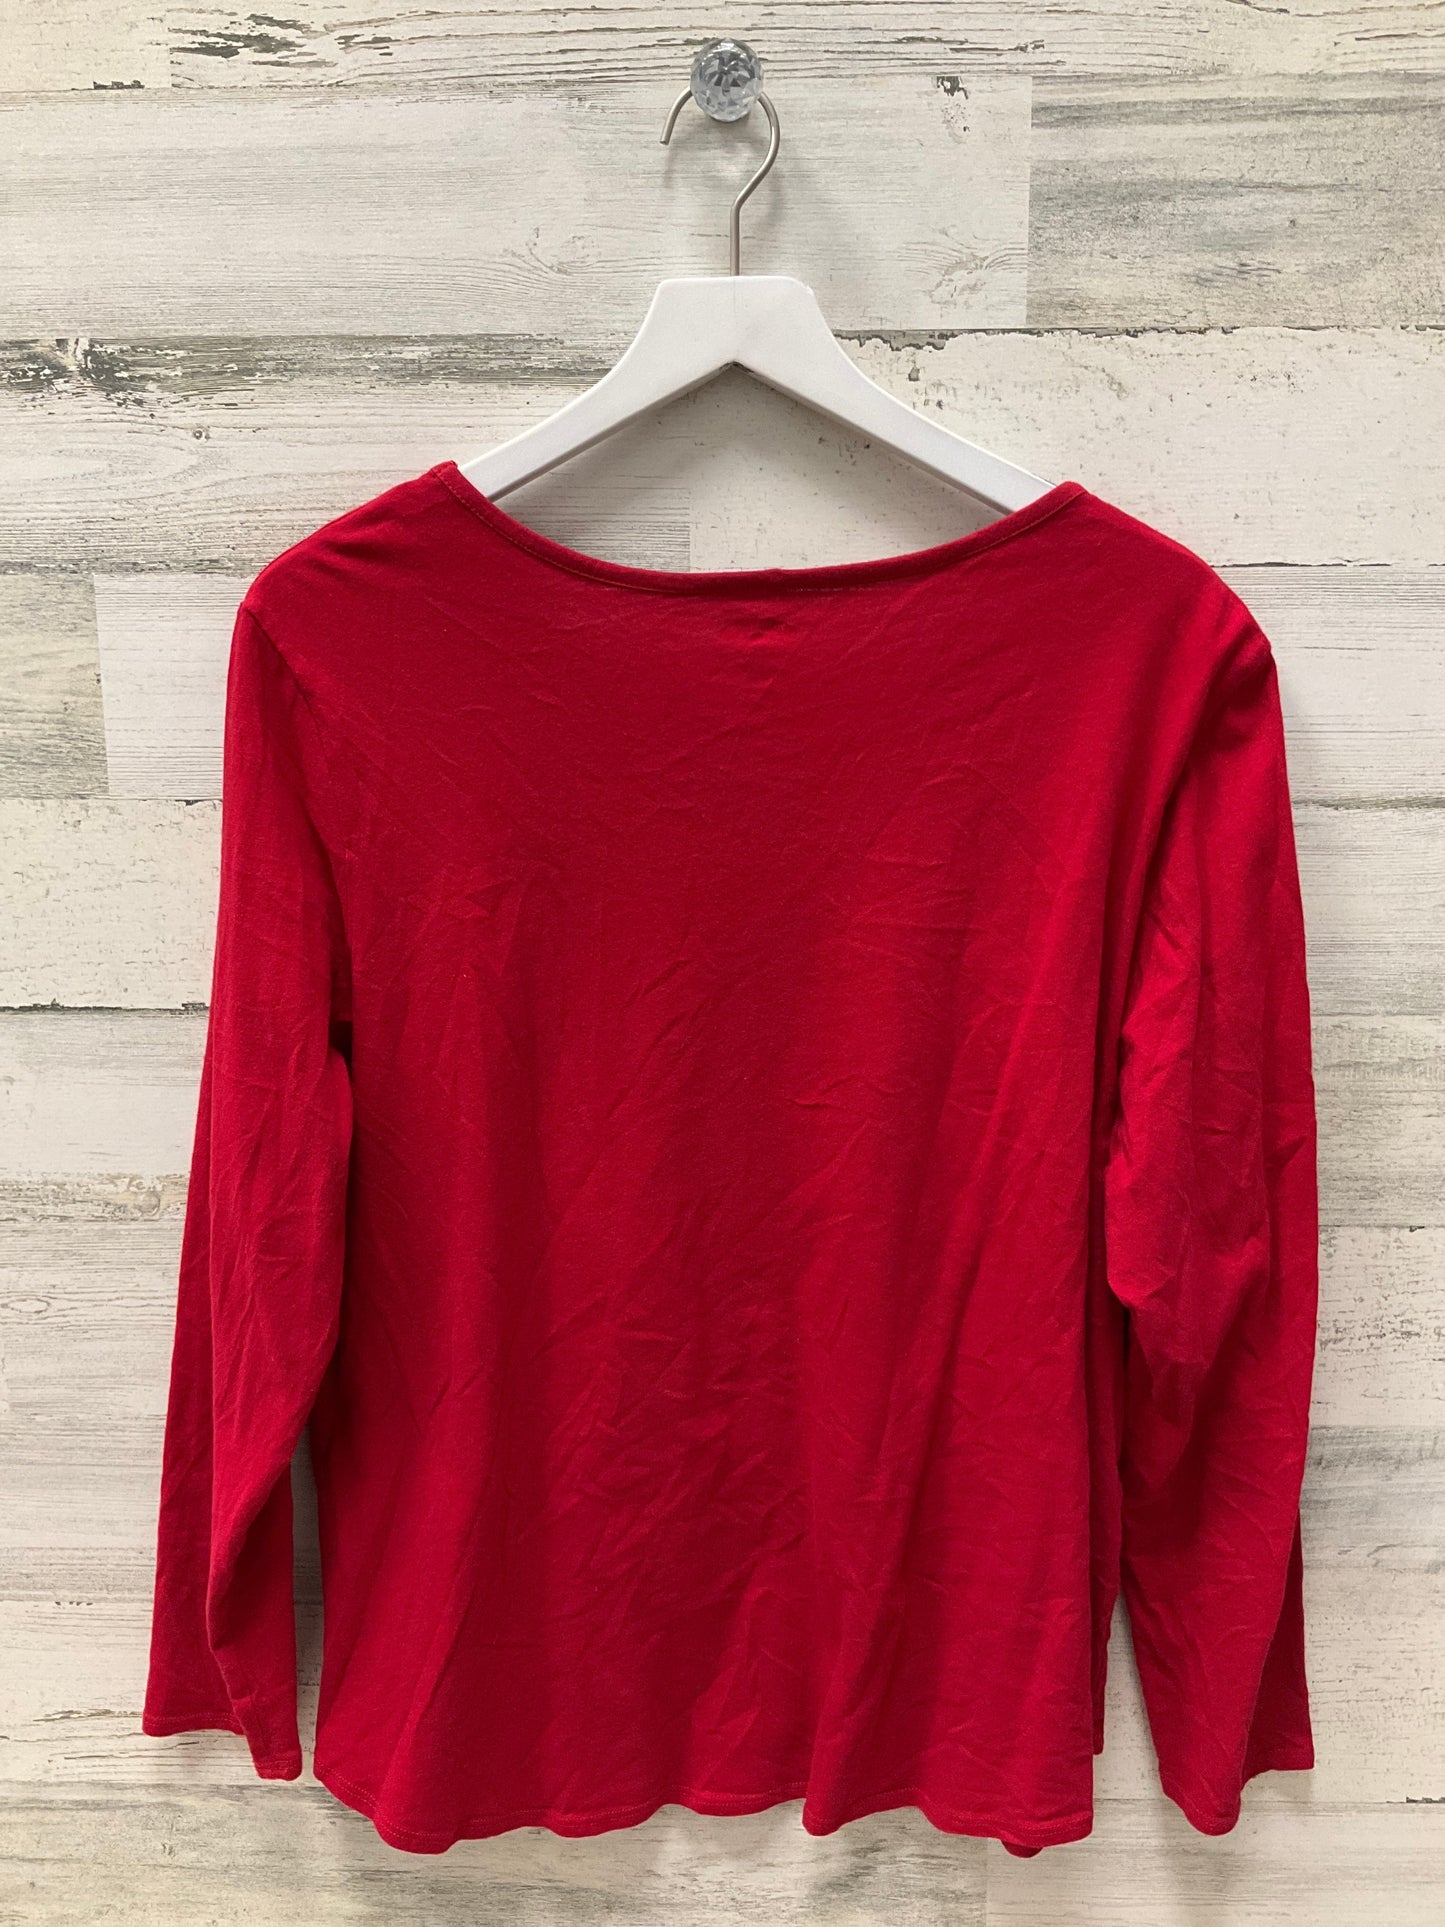 Holiday Top Long Sleeve By Holiday Time  Size: 2x